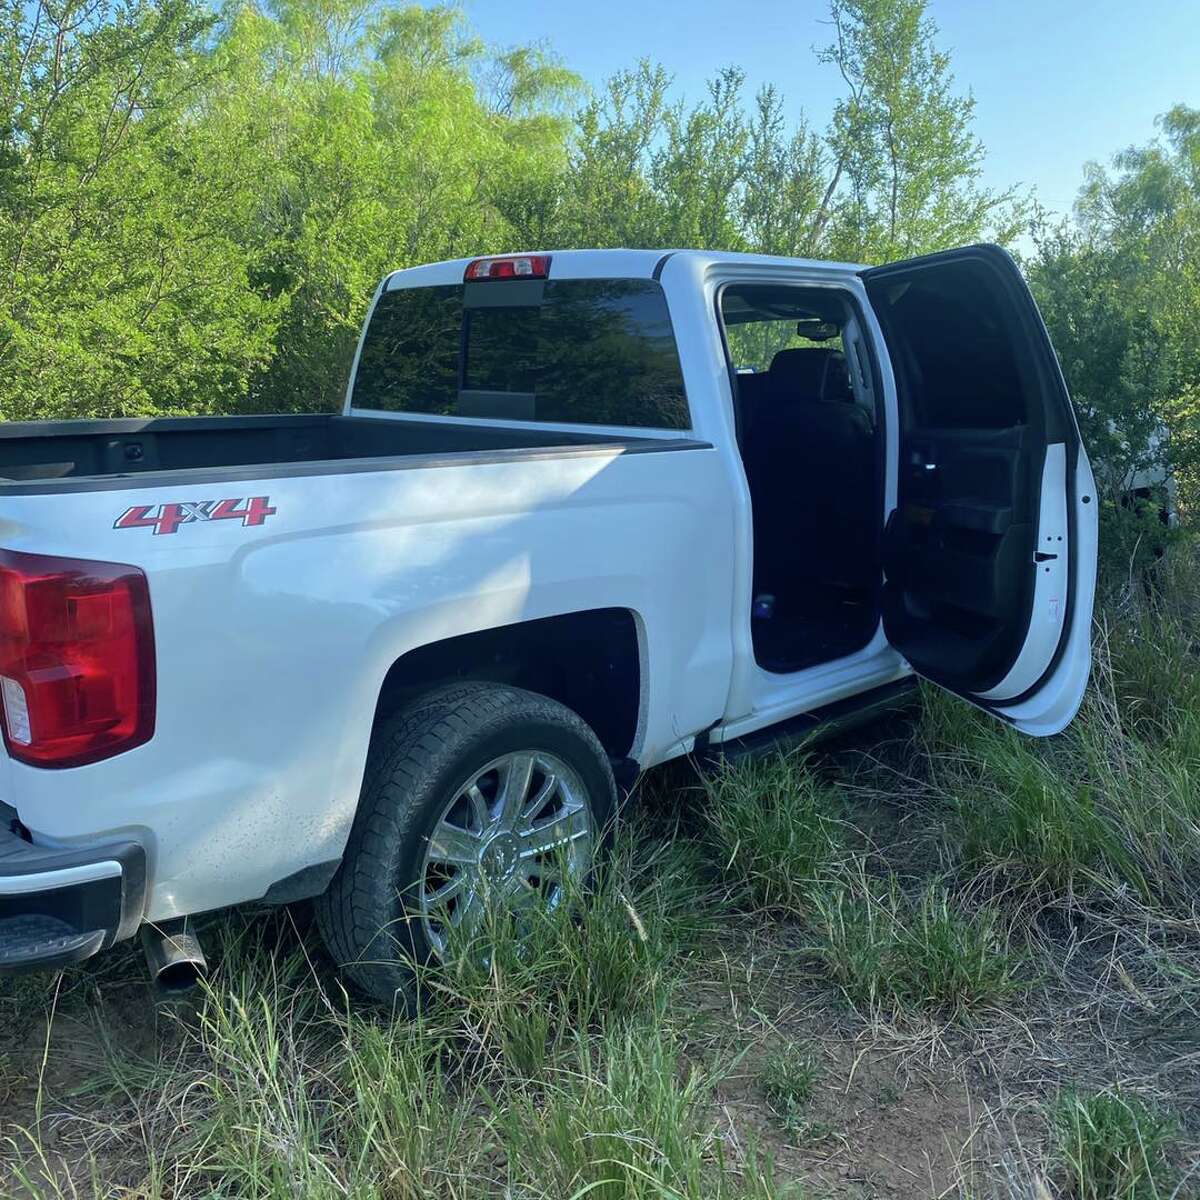 The Zapata County Sheriff's Office said this vehicle was loaded with several migrants while evading law enforcement on July 19.